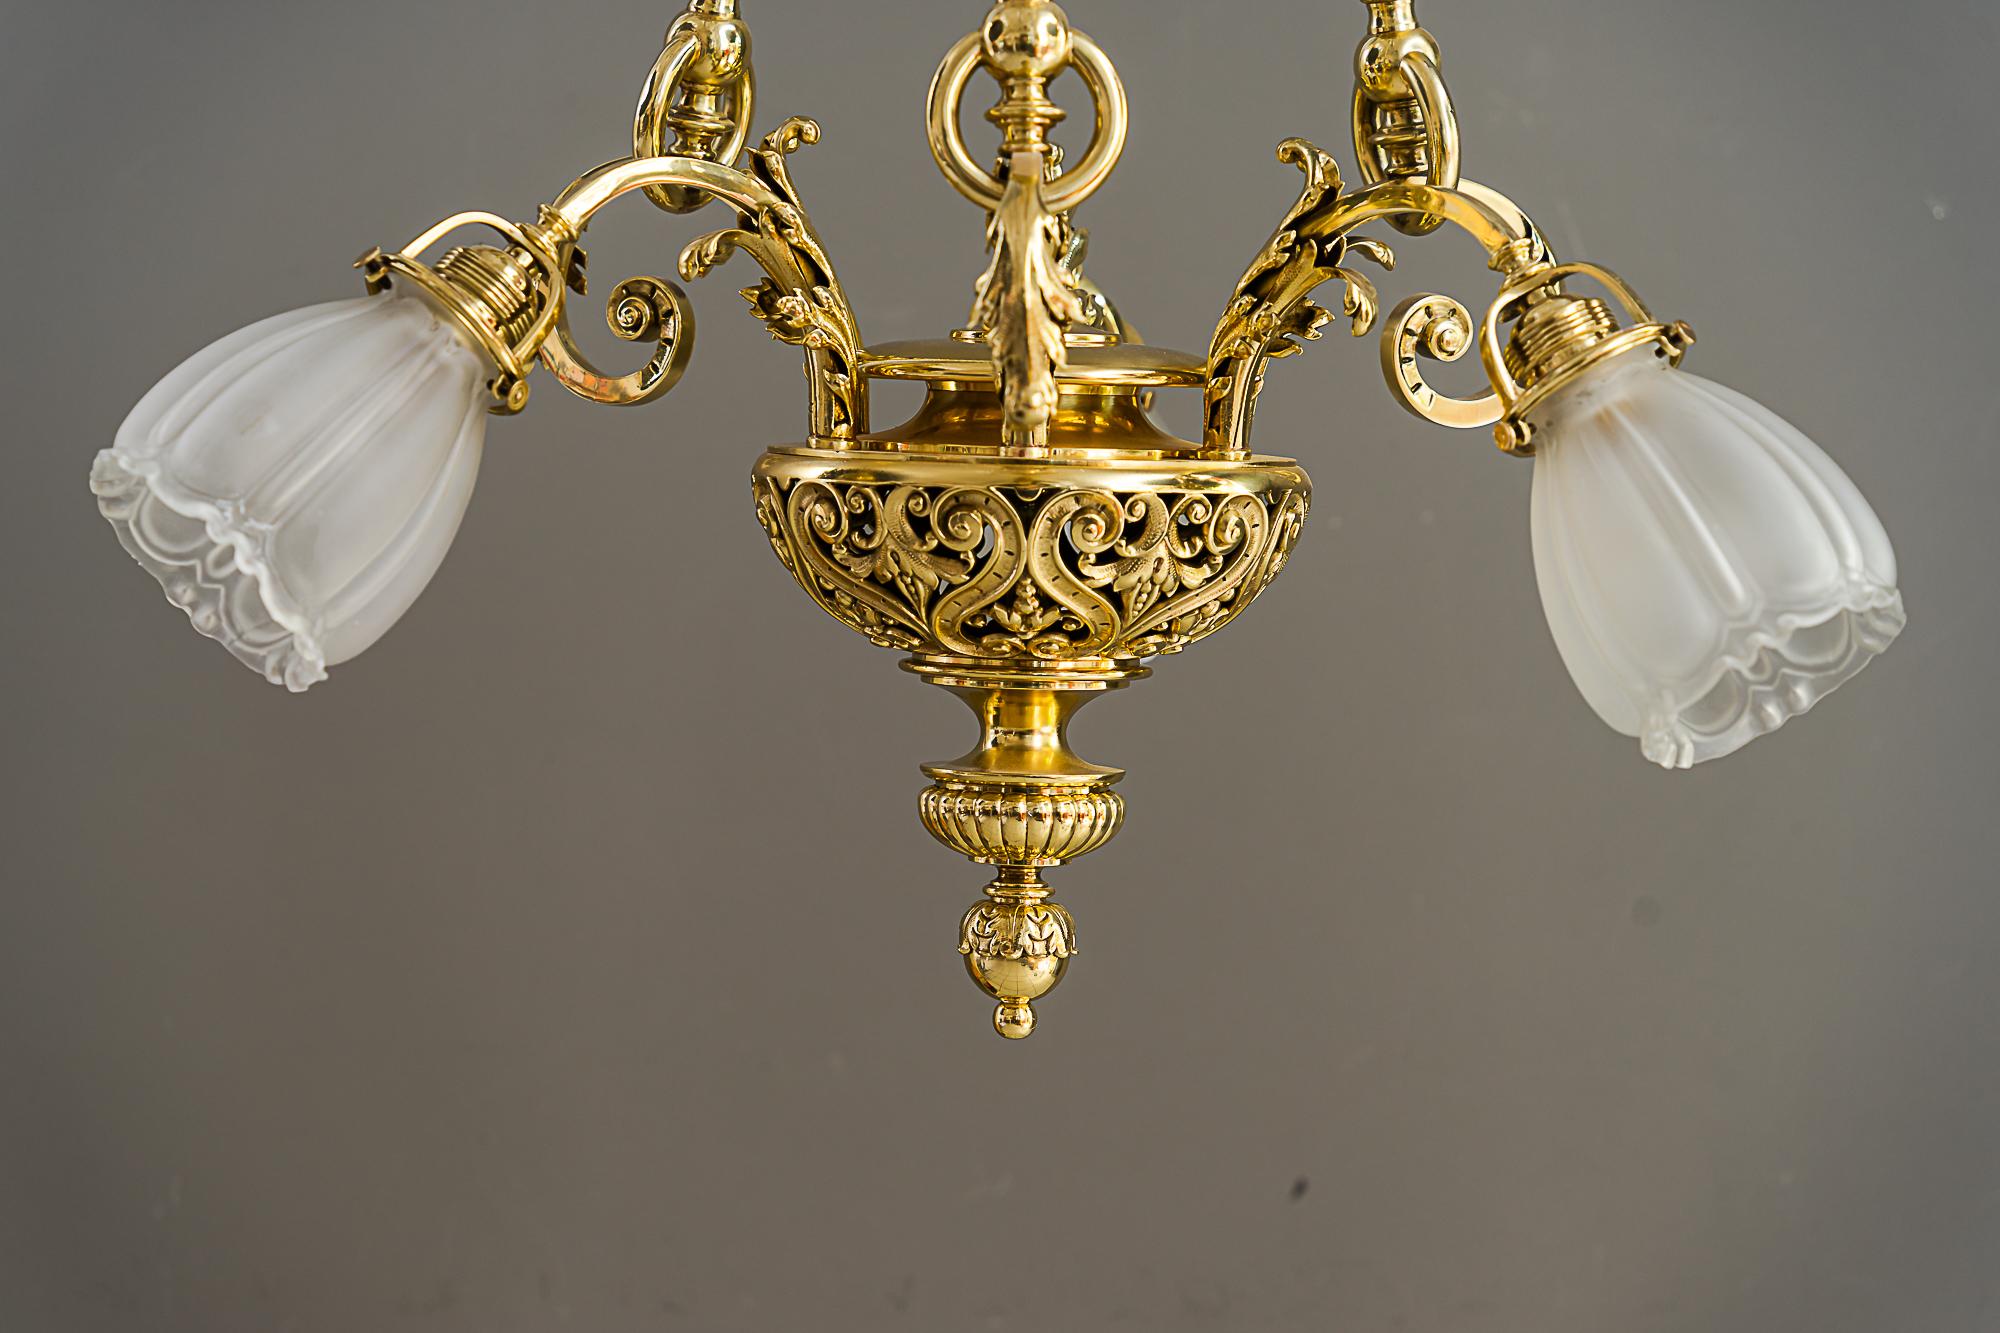 Neoclassical Historic chandelier vienna around 1890s with original antique glass shades For Sale